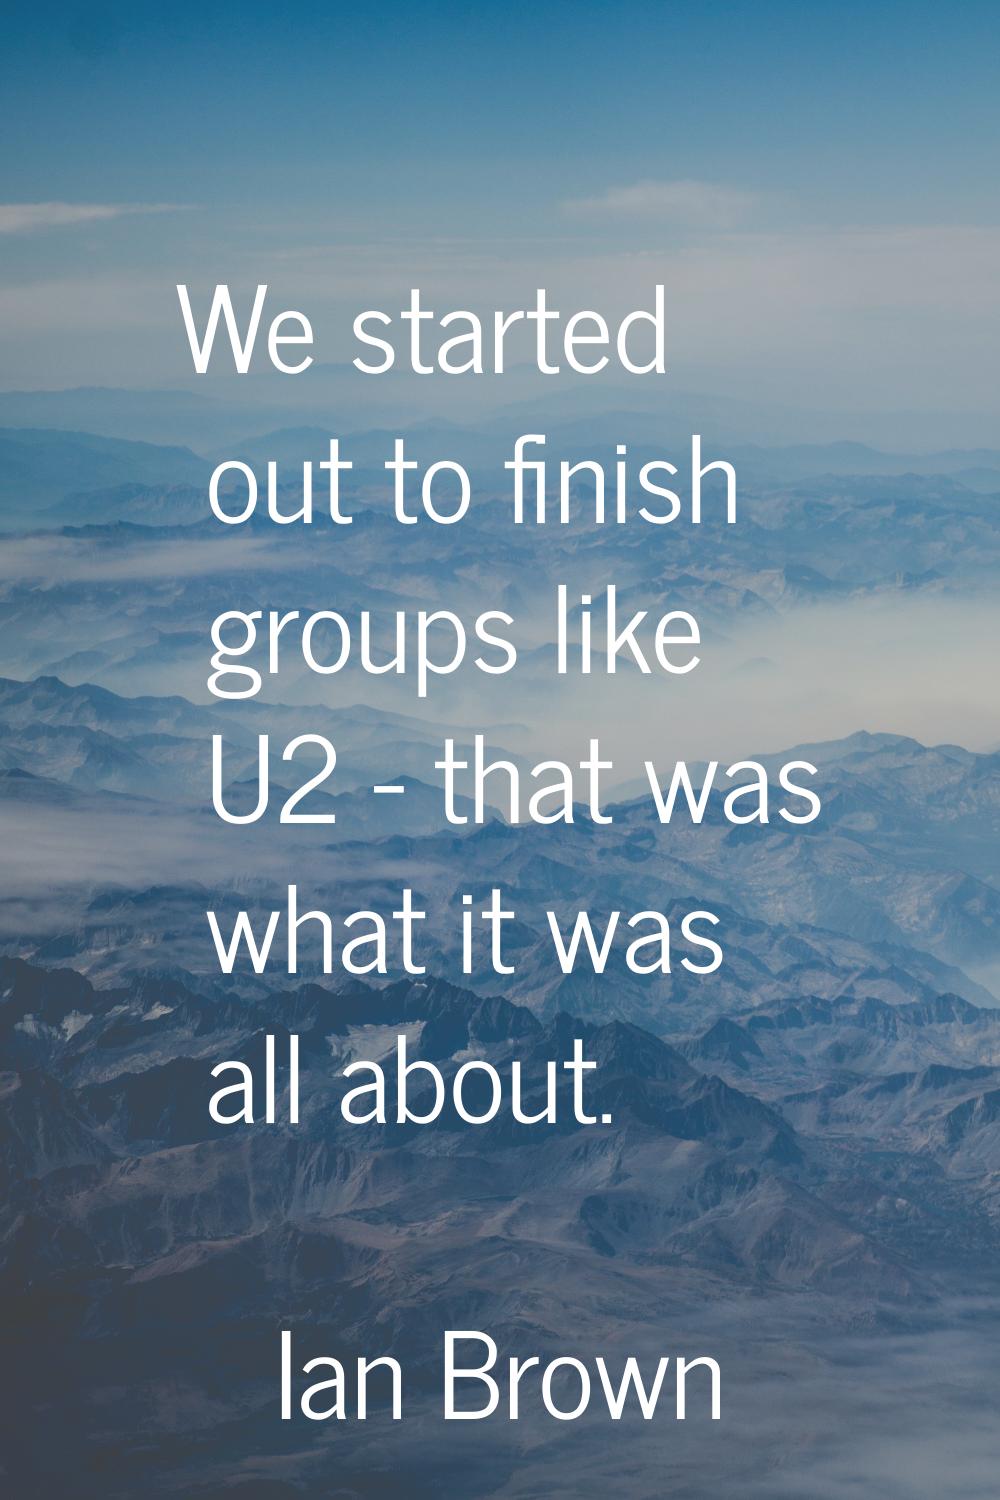 We started out to finish groups like U2 - that was what it was all about.